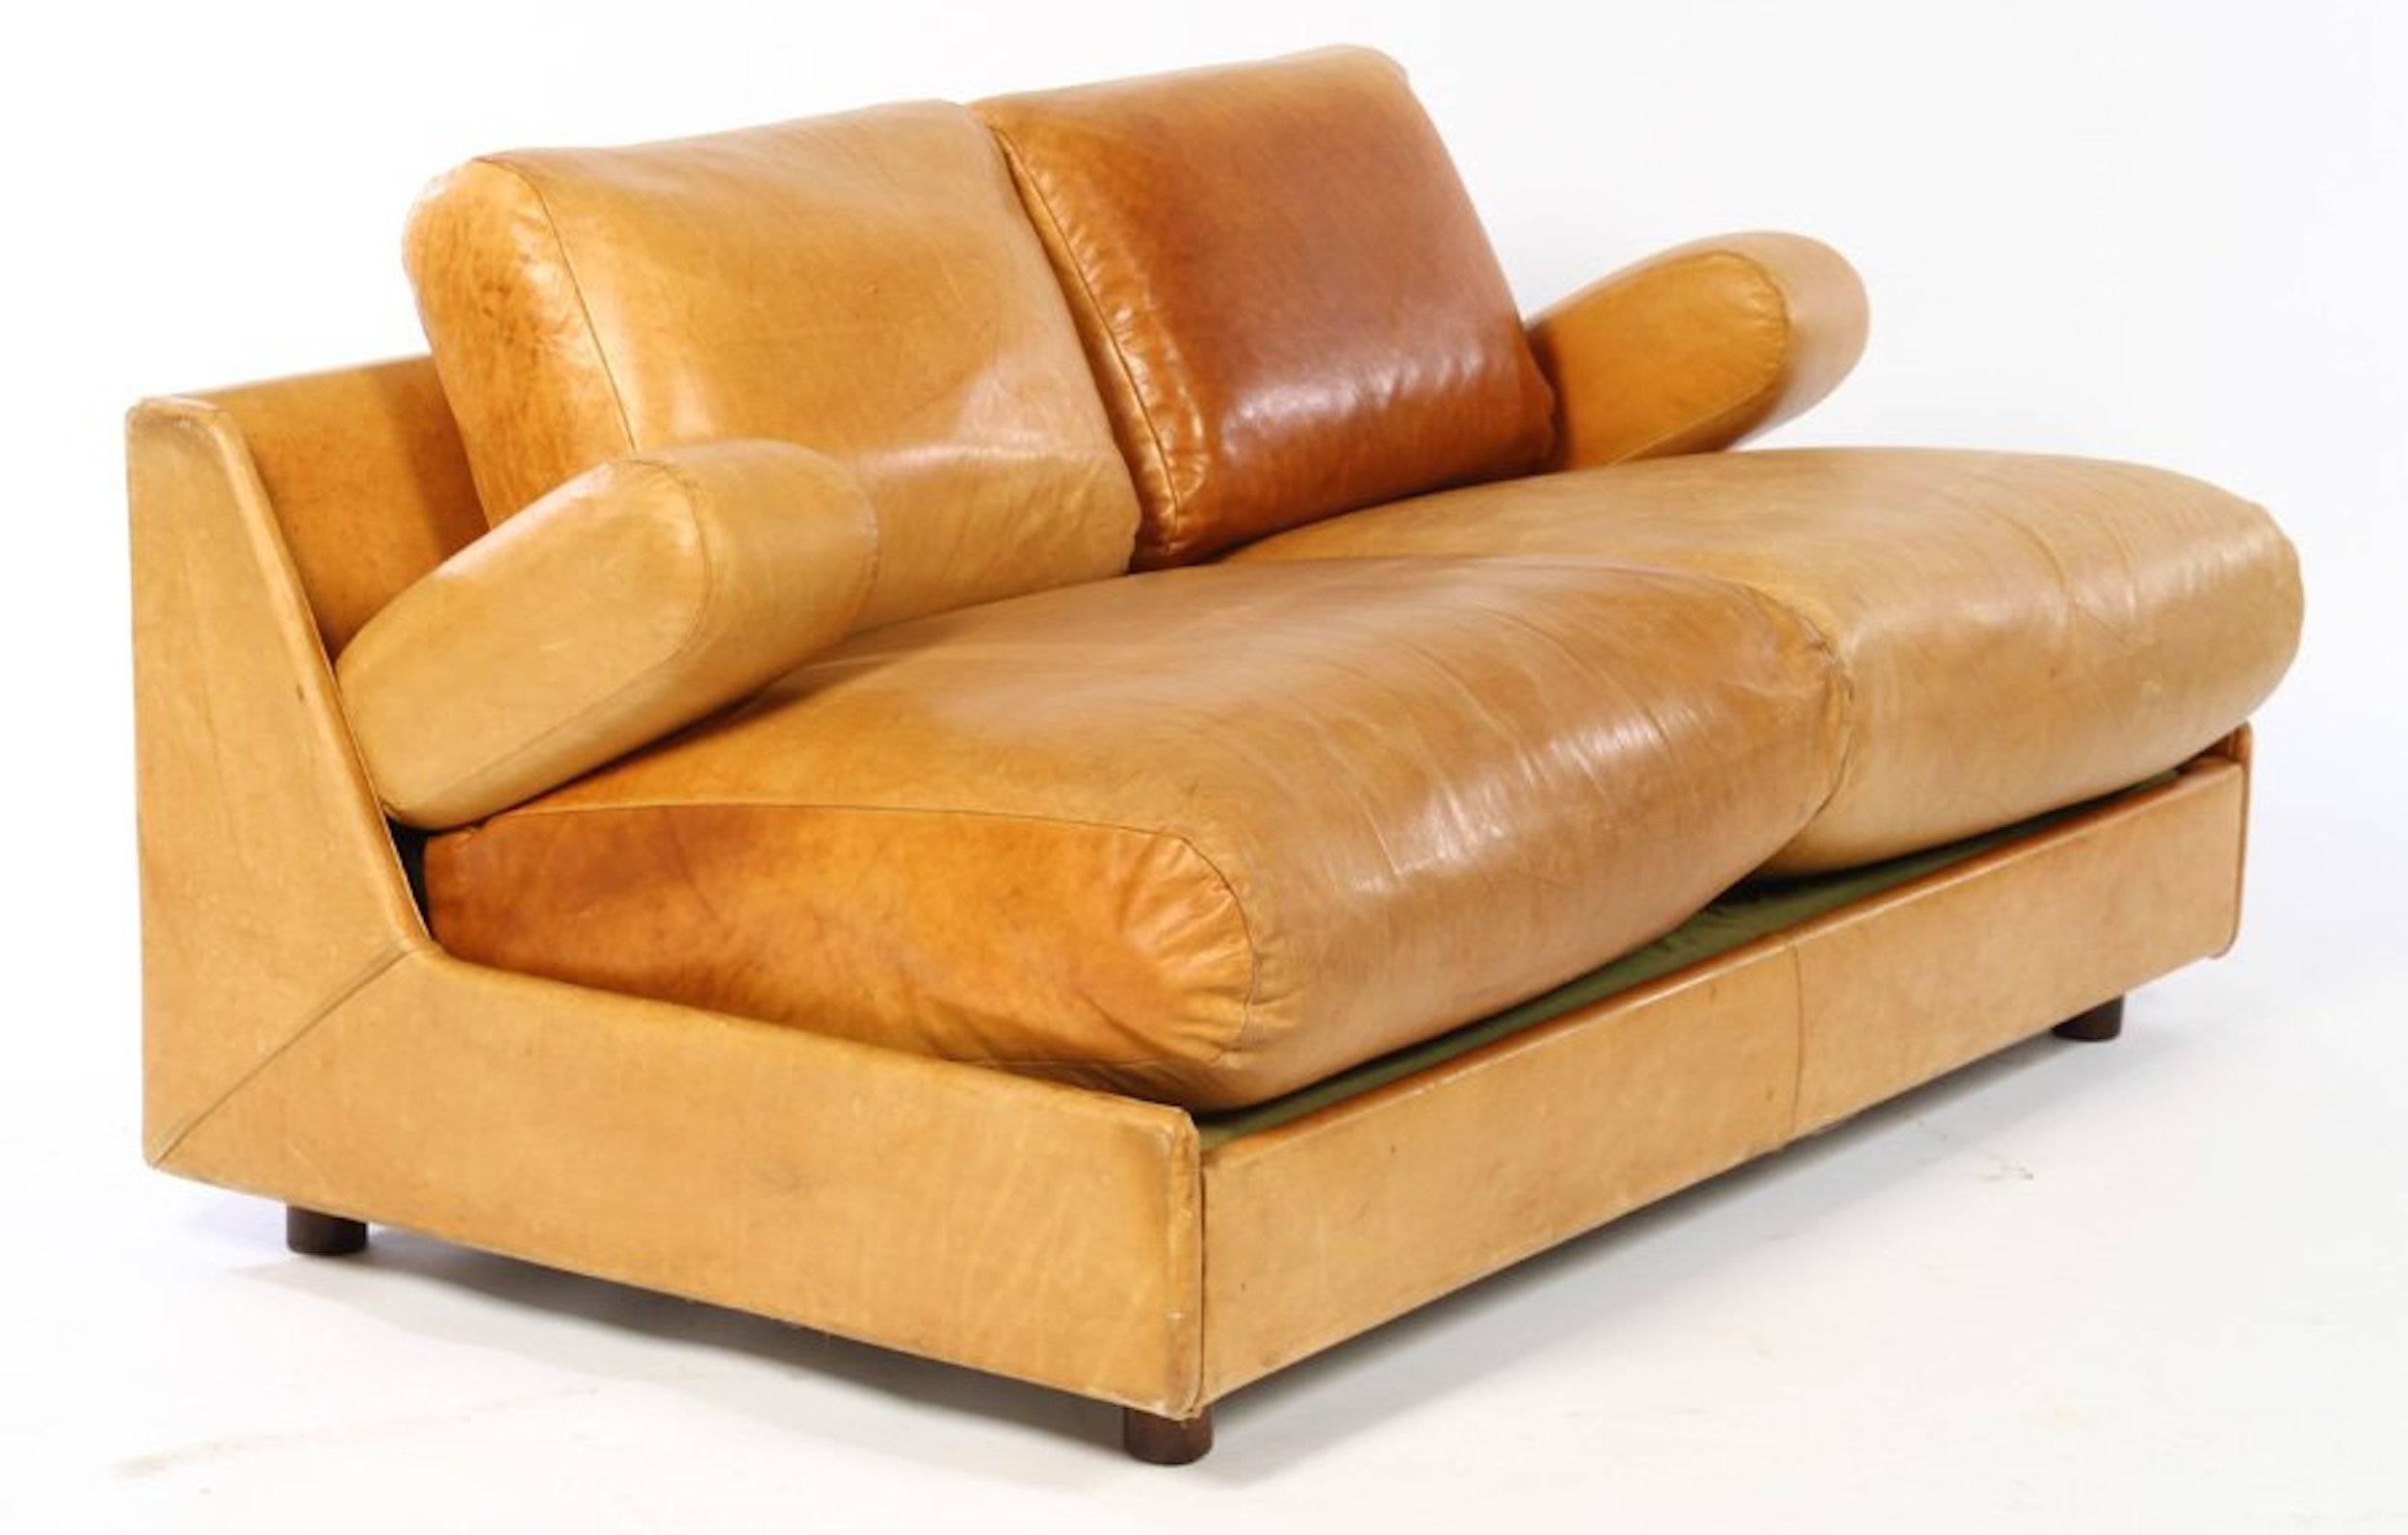 A Mid-Century Modern leather sofa having four loose cushions and articulated armrests, all raised on cylindrical feet, Italy, 1970.

Dimensions: Seat height 18.5